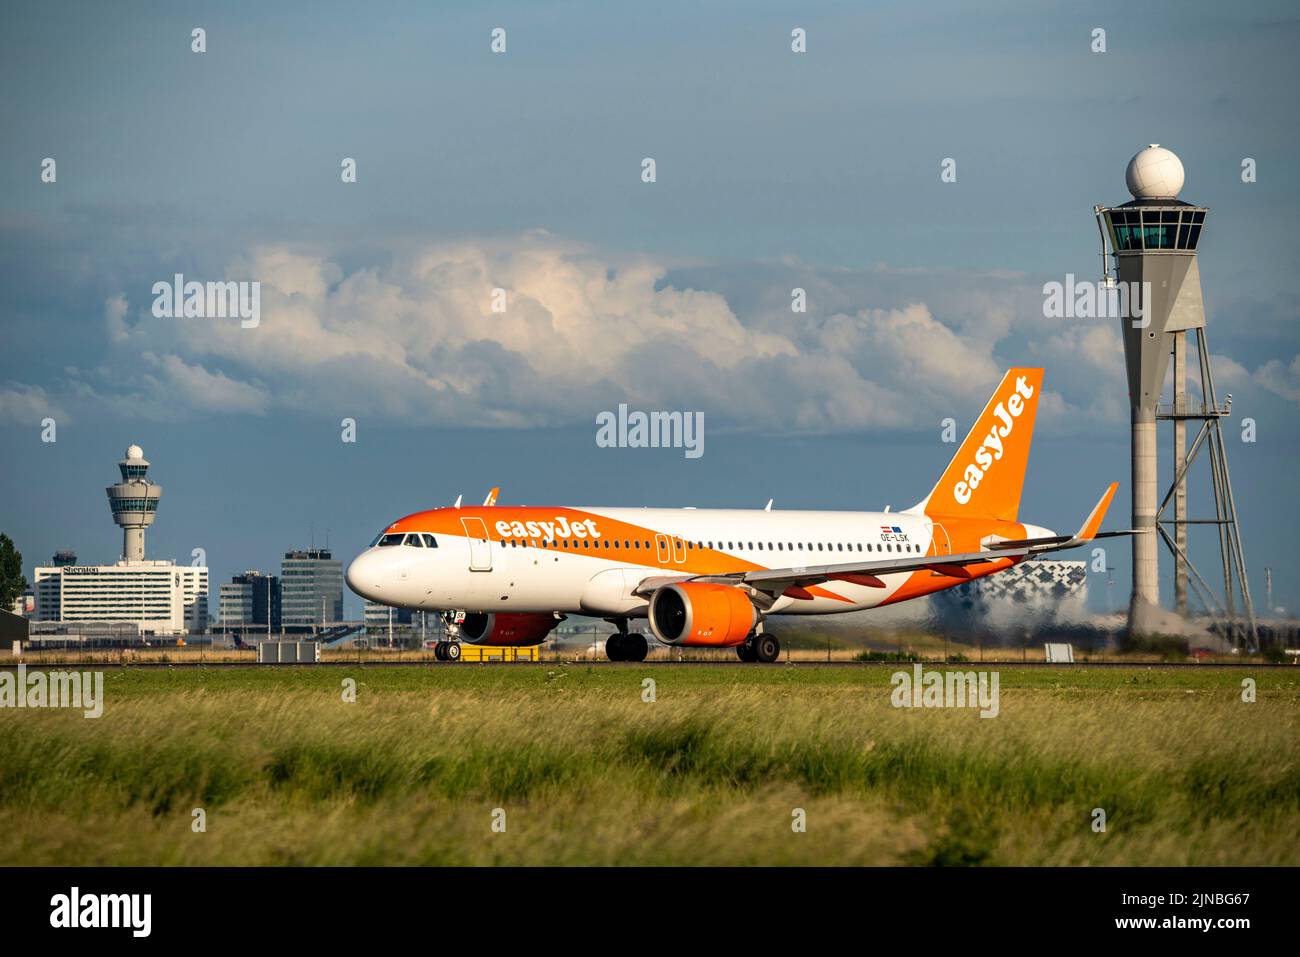 Amsterdam Shiphol Airport, Polderbaan, one of 6 runways, Tower Air Traffic Control, OE-LSK, easyJet Europe Airbus A320neo Stock Photo